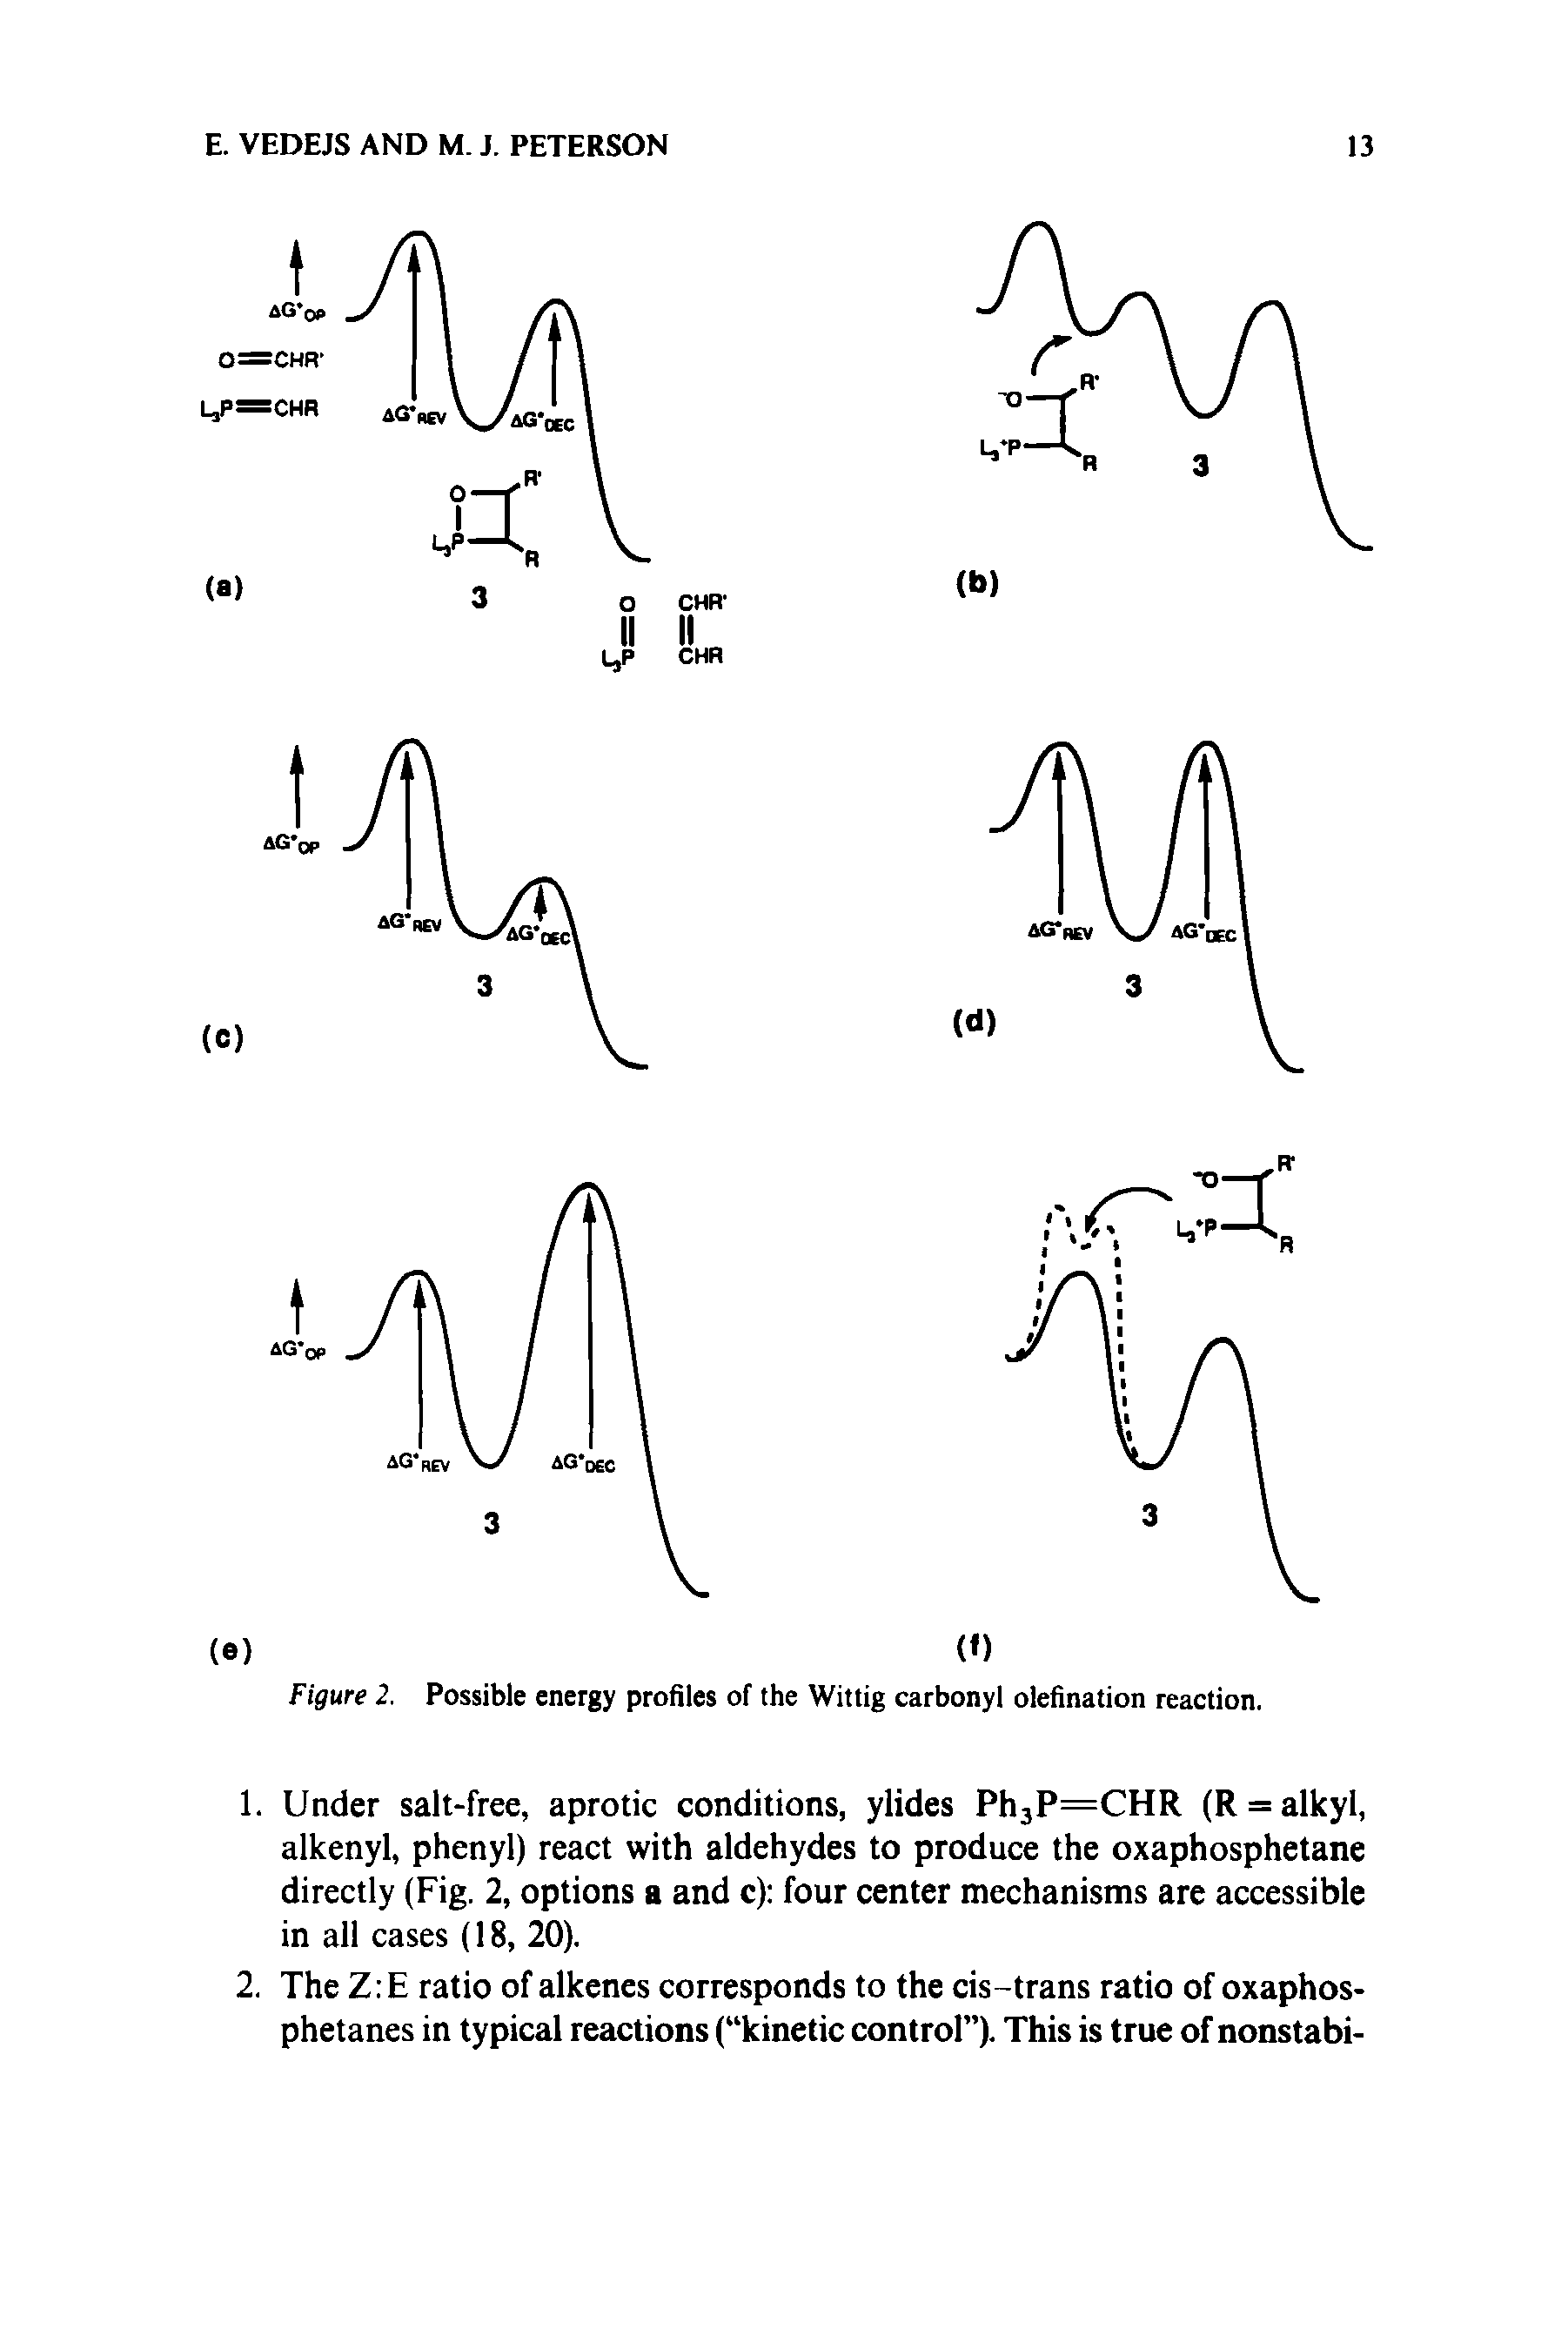 Figure Possible energy profiles of the Wittig carbonyl olefination reaction.